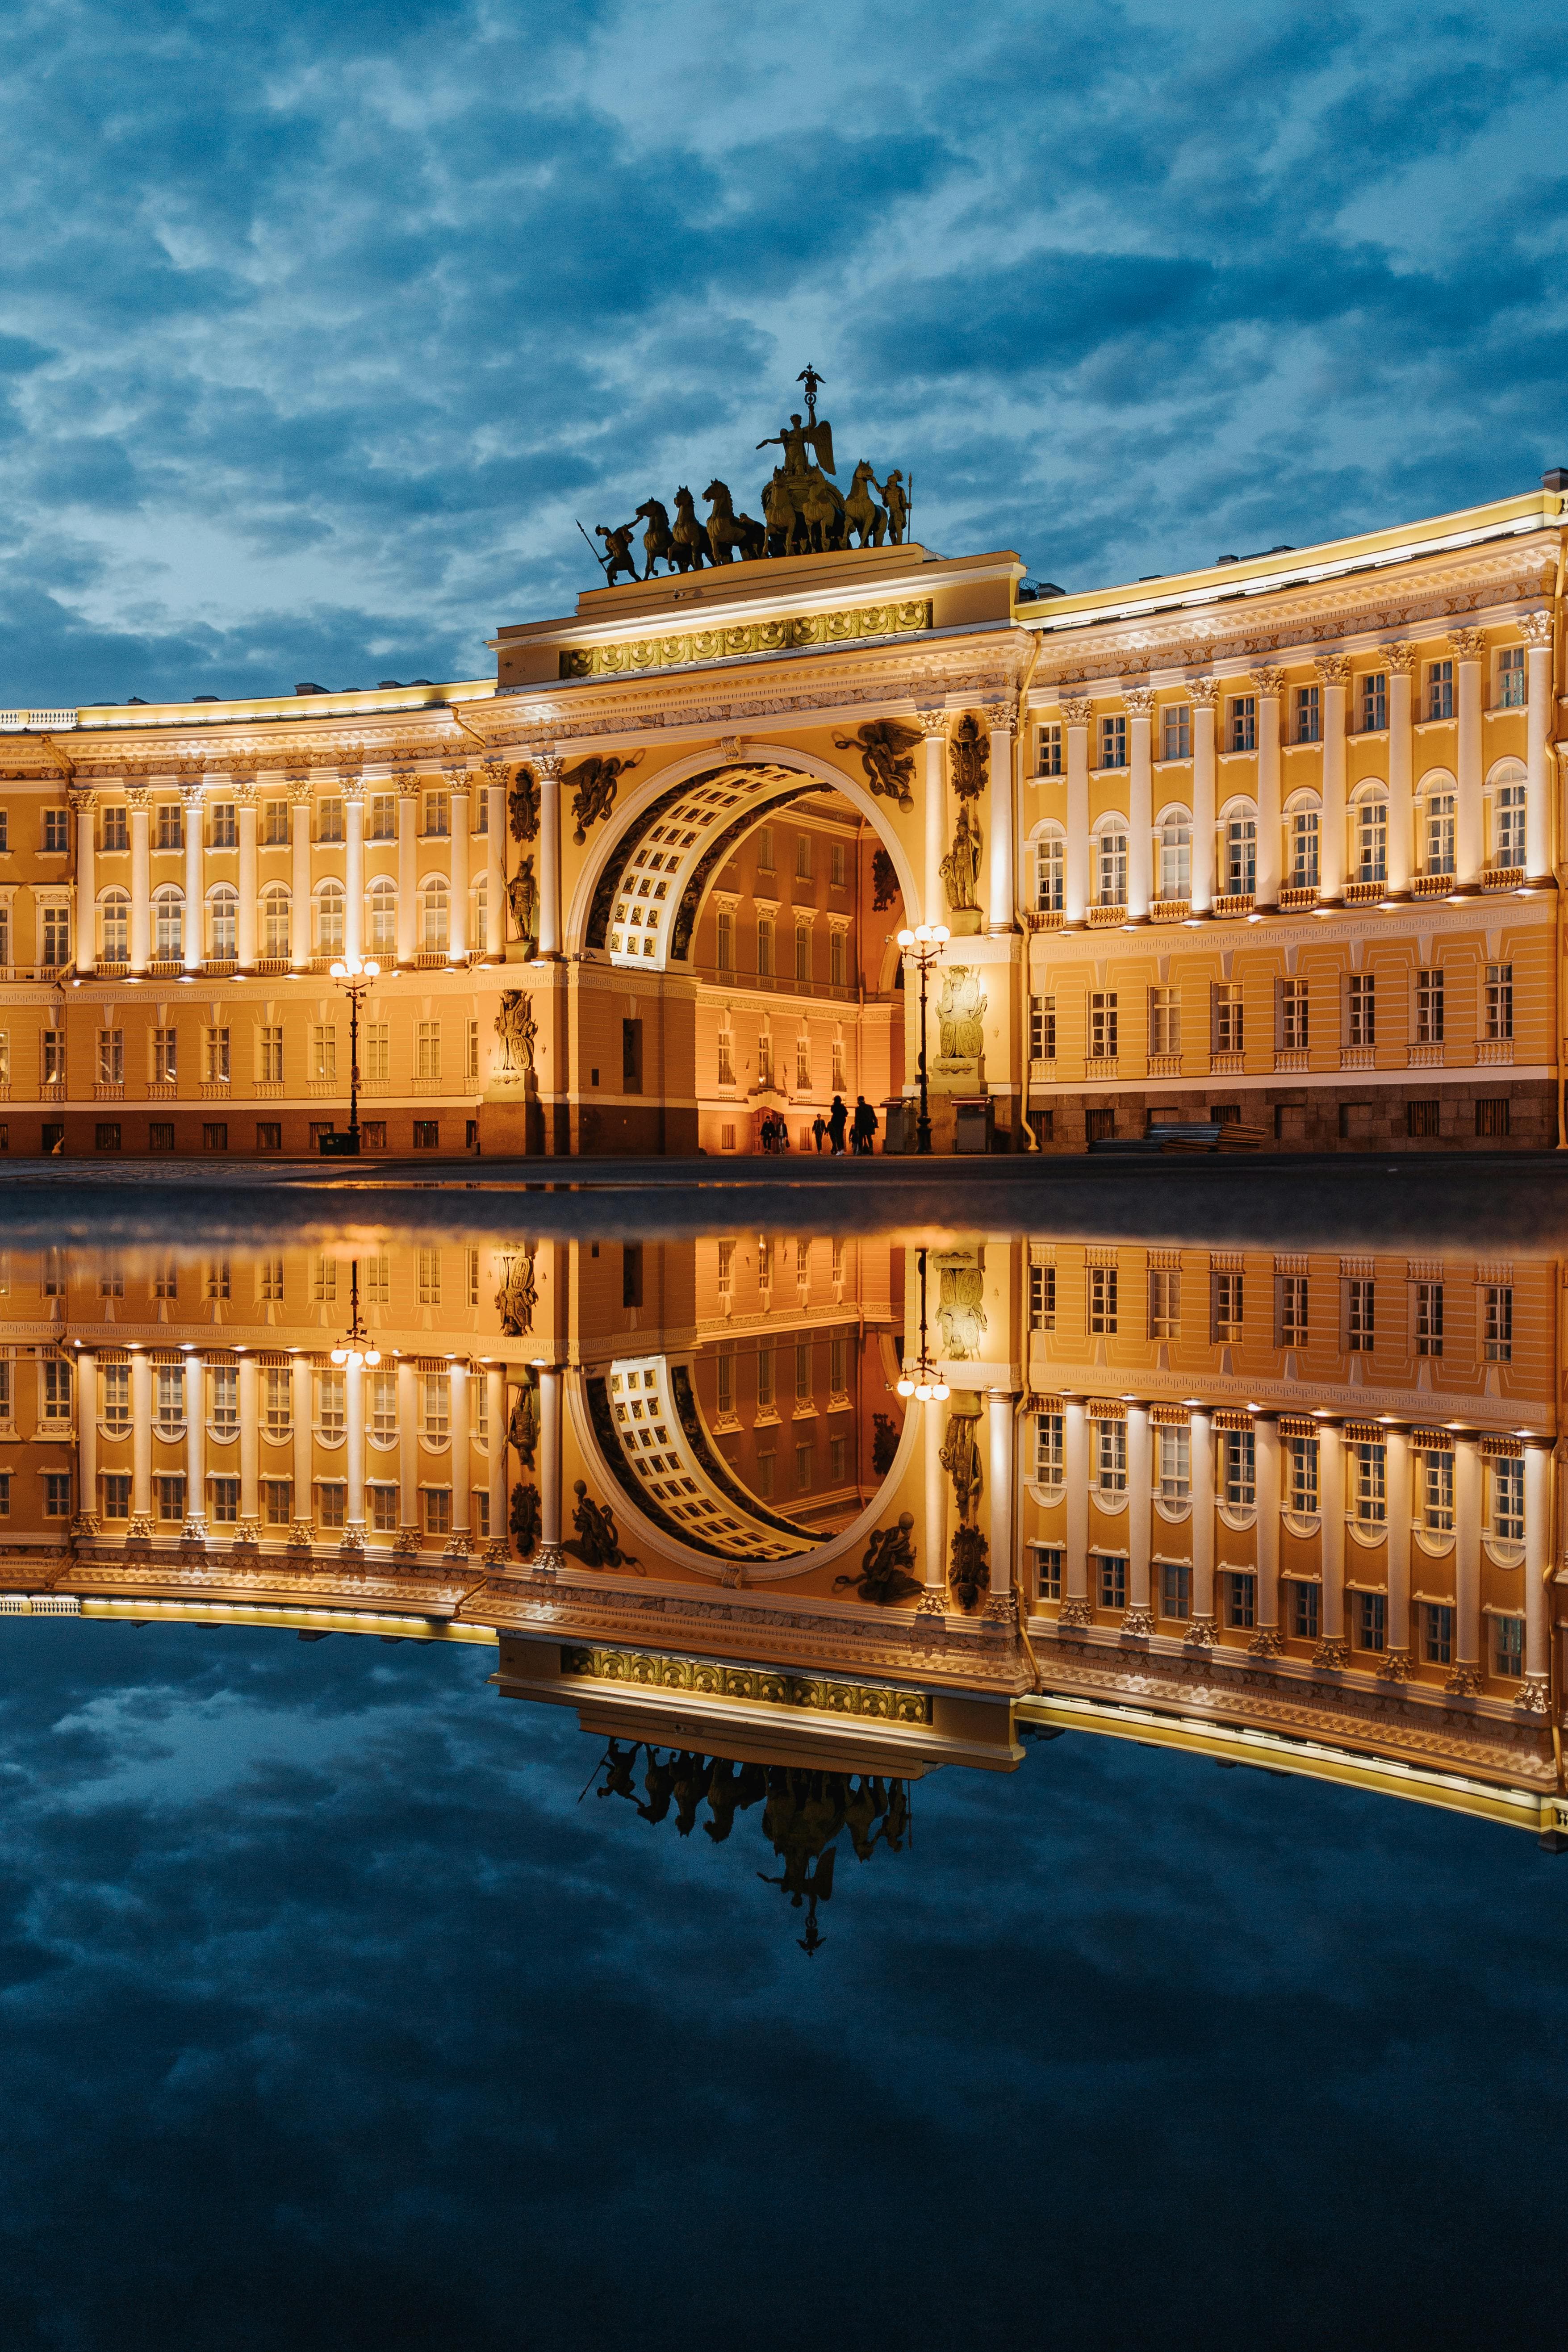 Top 15 places to see in Saint-Petersburg, Russia